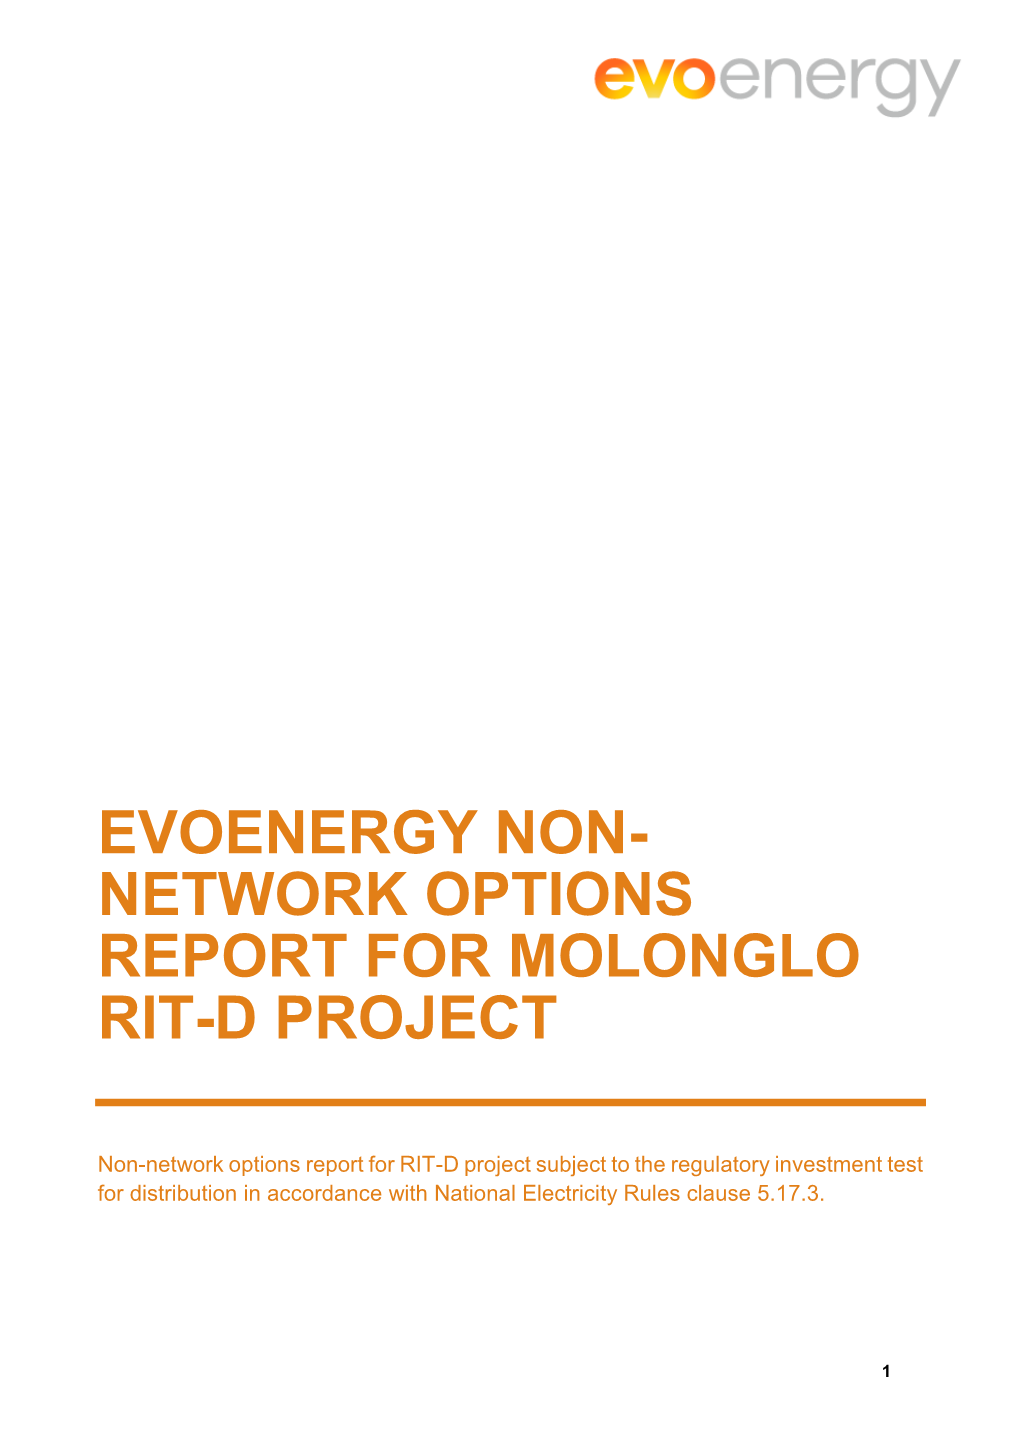 Evoenergy Non- Network Options Report for Molonglo Rit-D Project